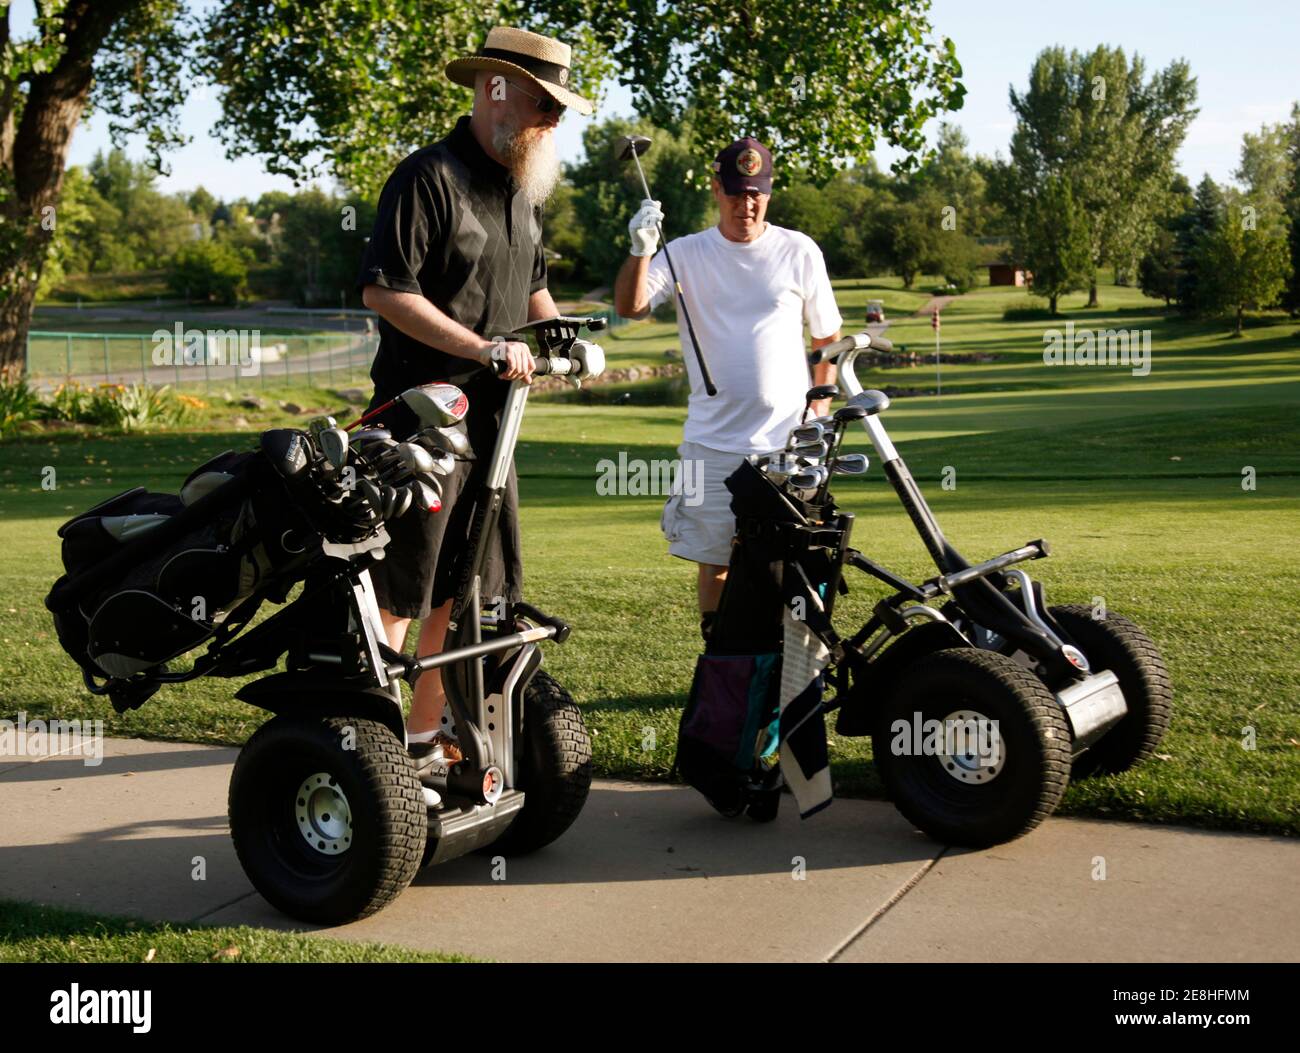 Marvin Hutchens (L) and Jimmy Ray Henson use Segway personal transports at Indian Tree golf course in Arvada, Colorado July 17, 2010.  The Segways for golfers featuring a golf bag rack, scorecard holder, turf-friendly tires were recently introduced at the course.  REUTERS/Rick Wilking (UNITED STATES - Tags: SPORT SOCIETY GOLF) Stock Photo